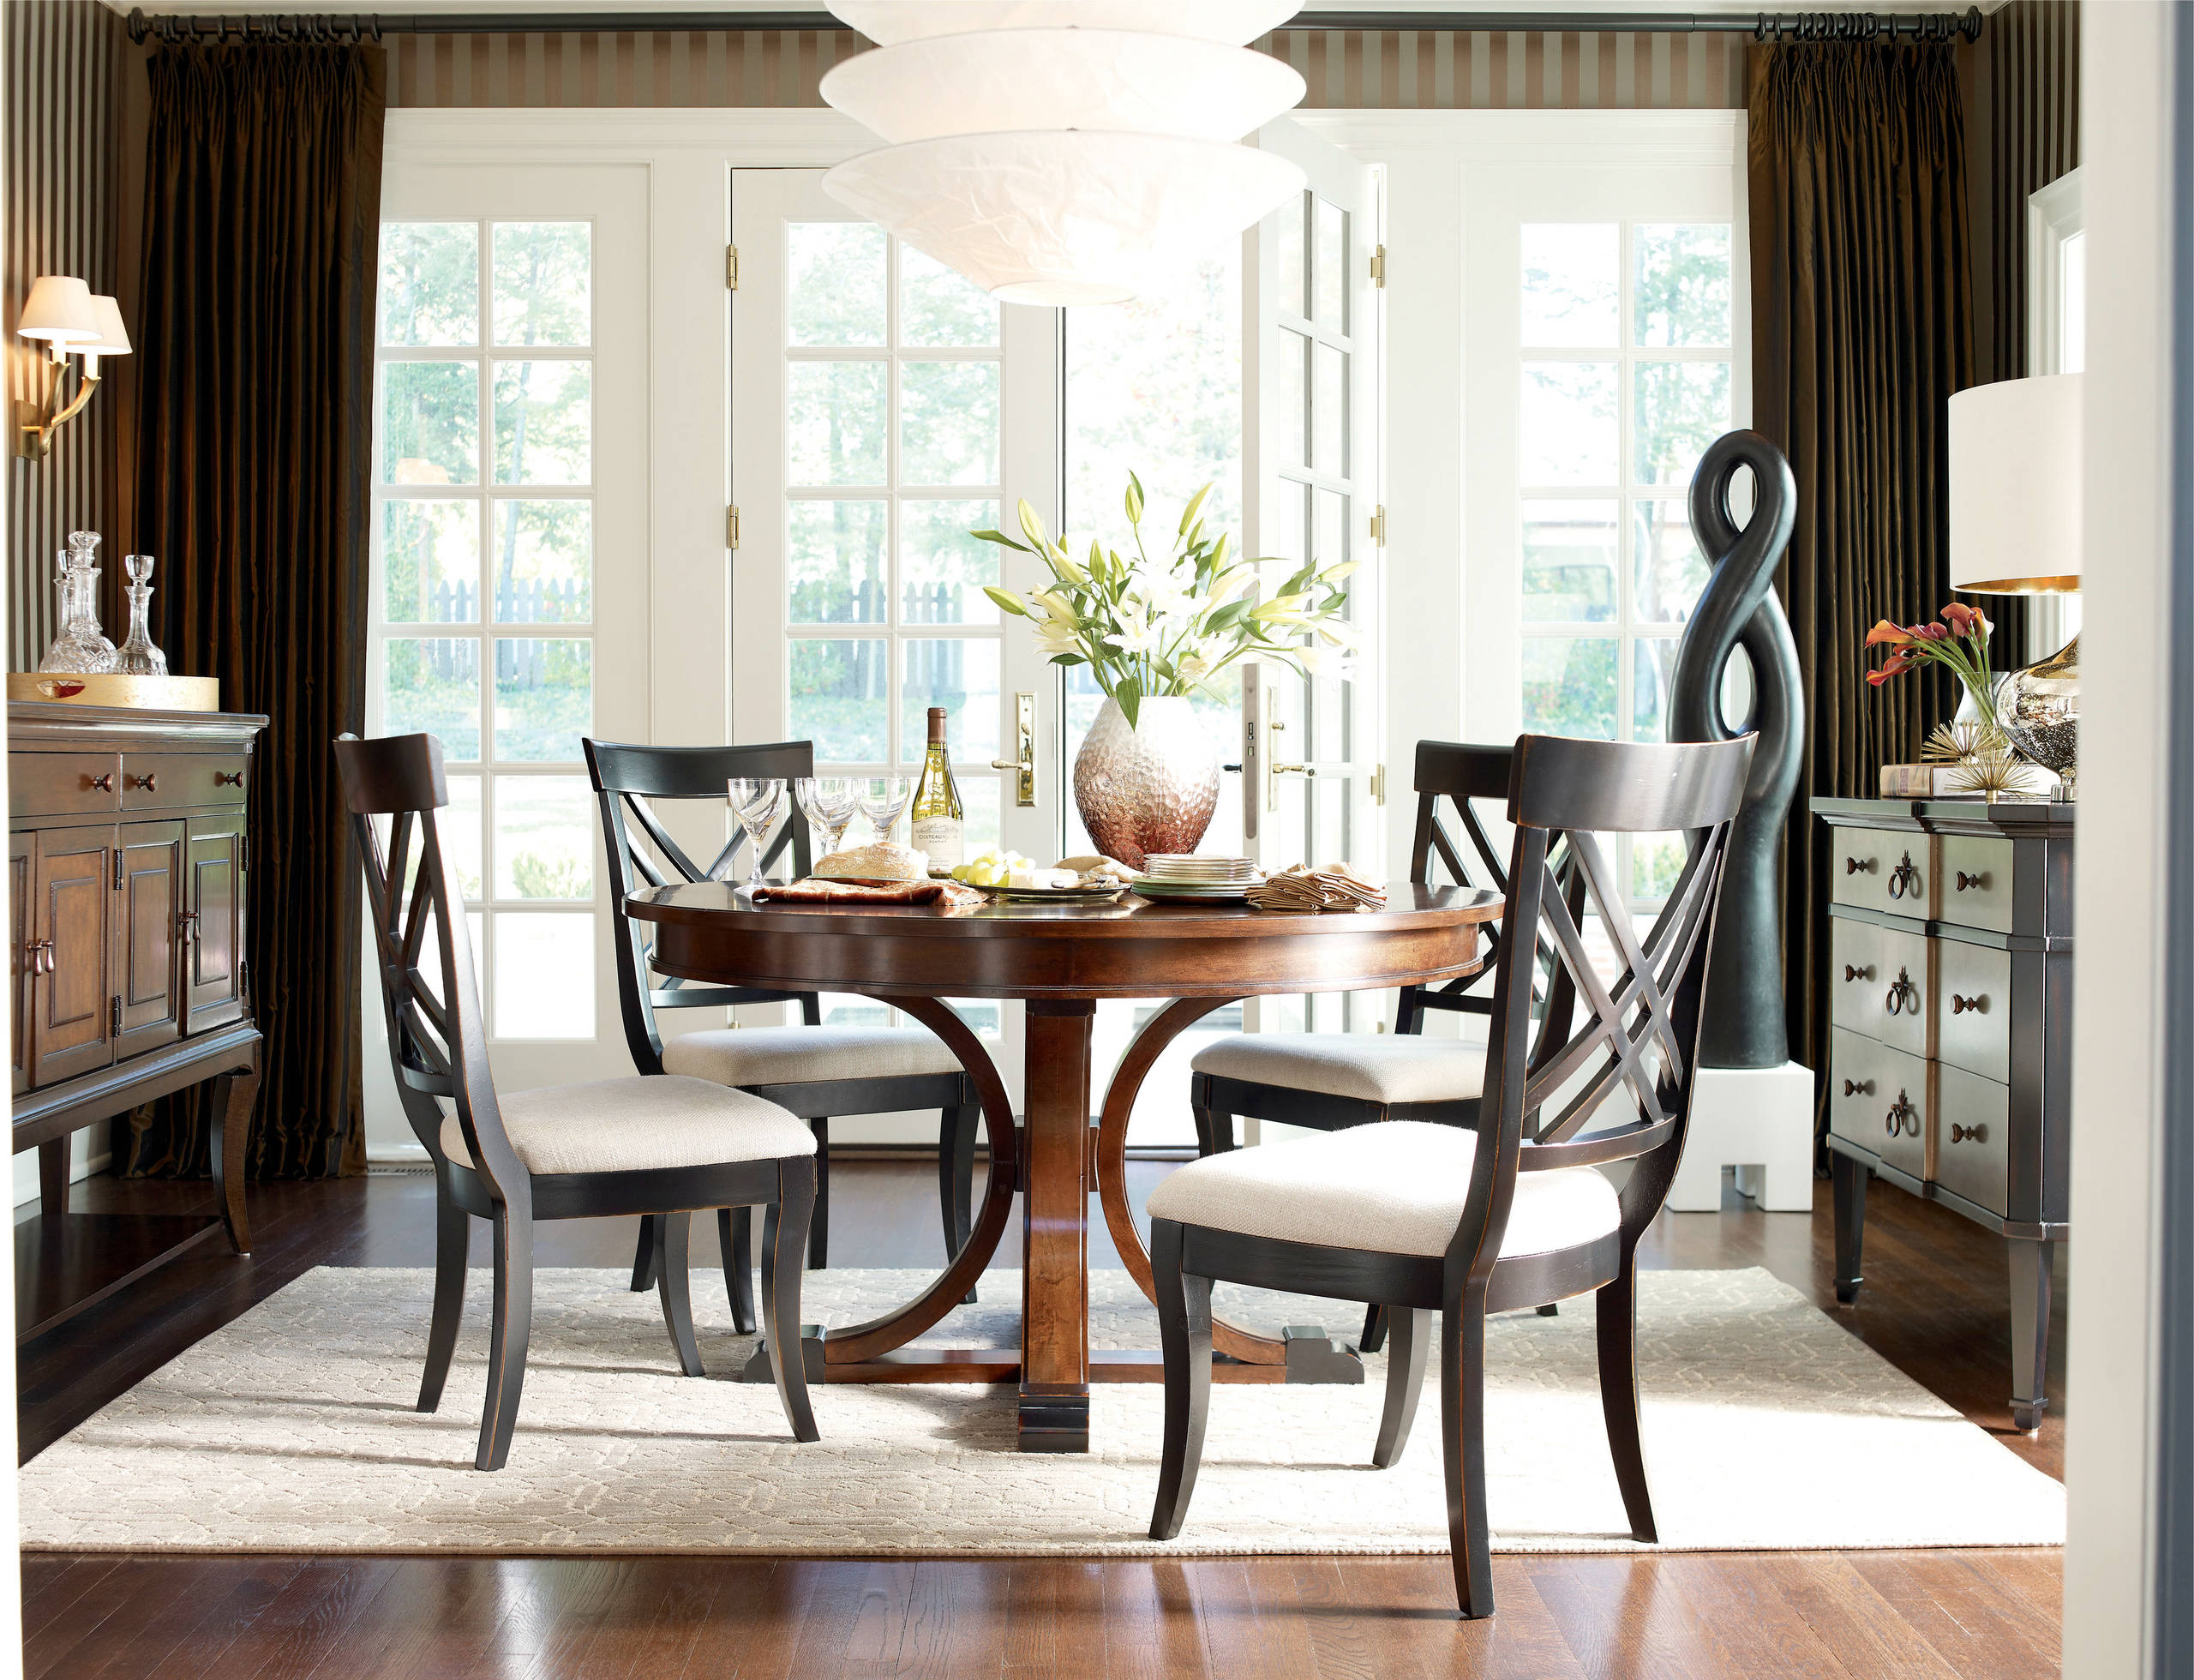 70 Inch Round Table Ideas Photos Houzz, 70 Round Dining Table Set